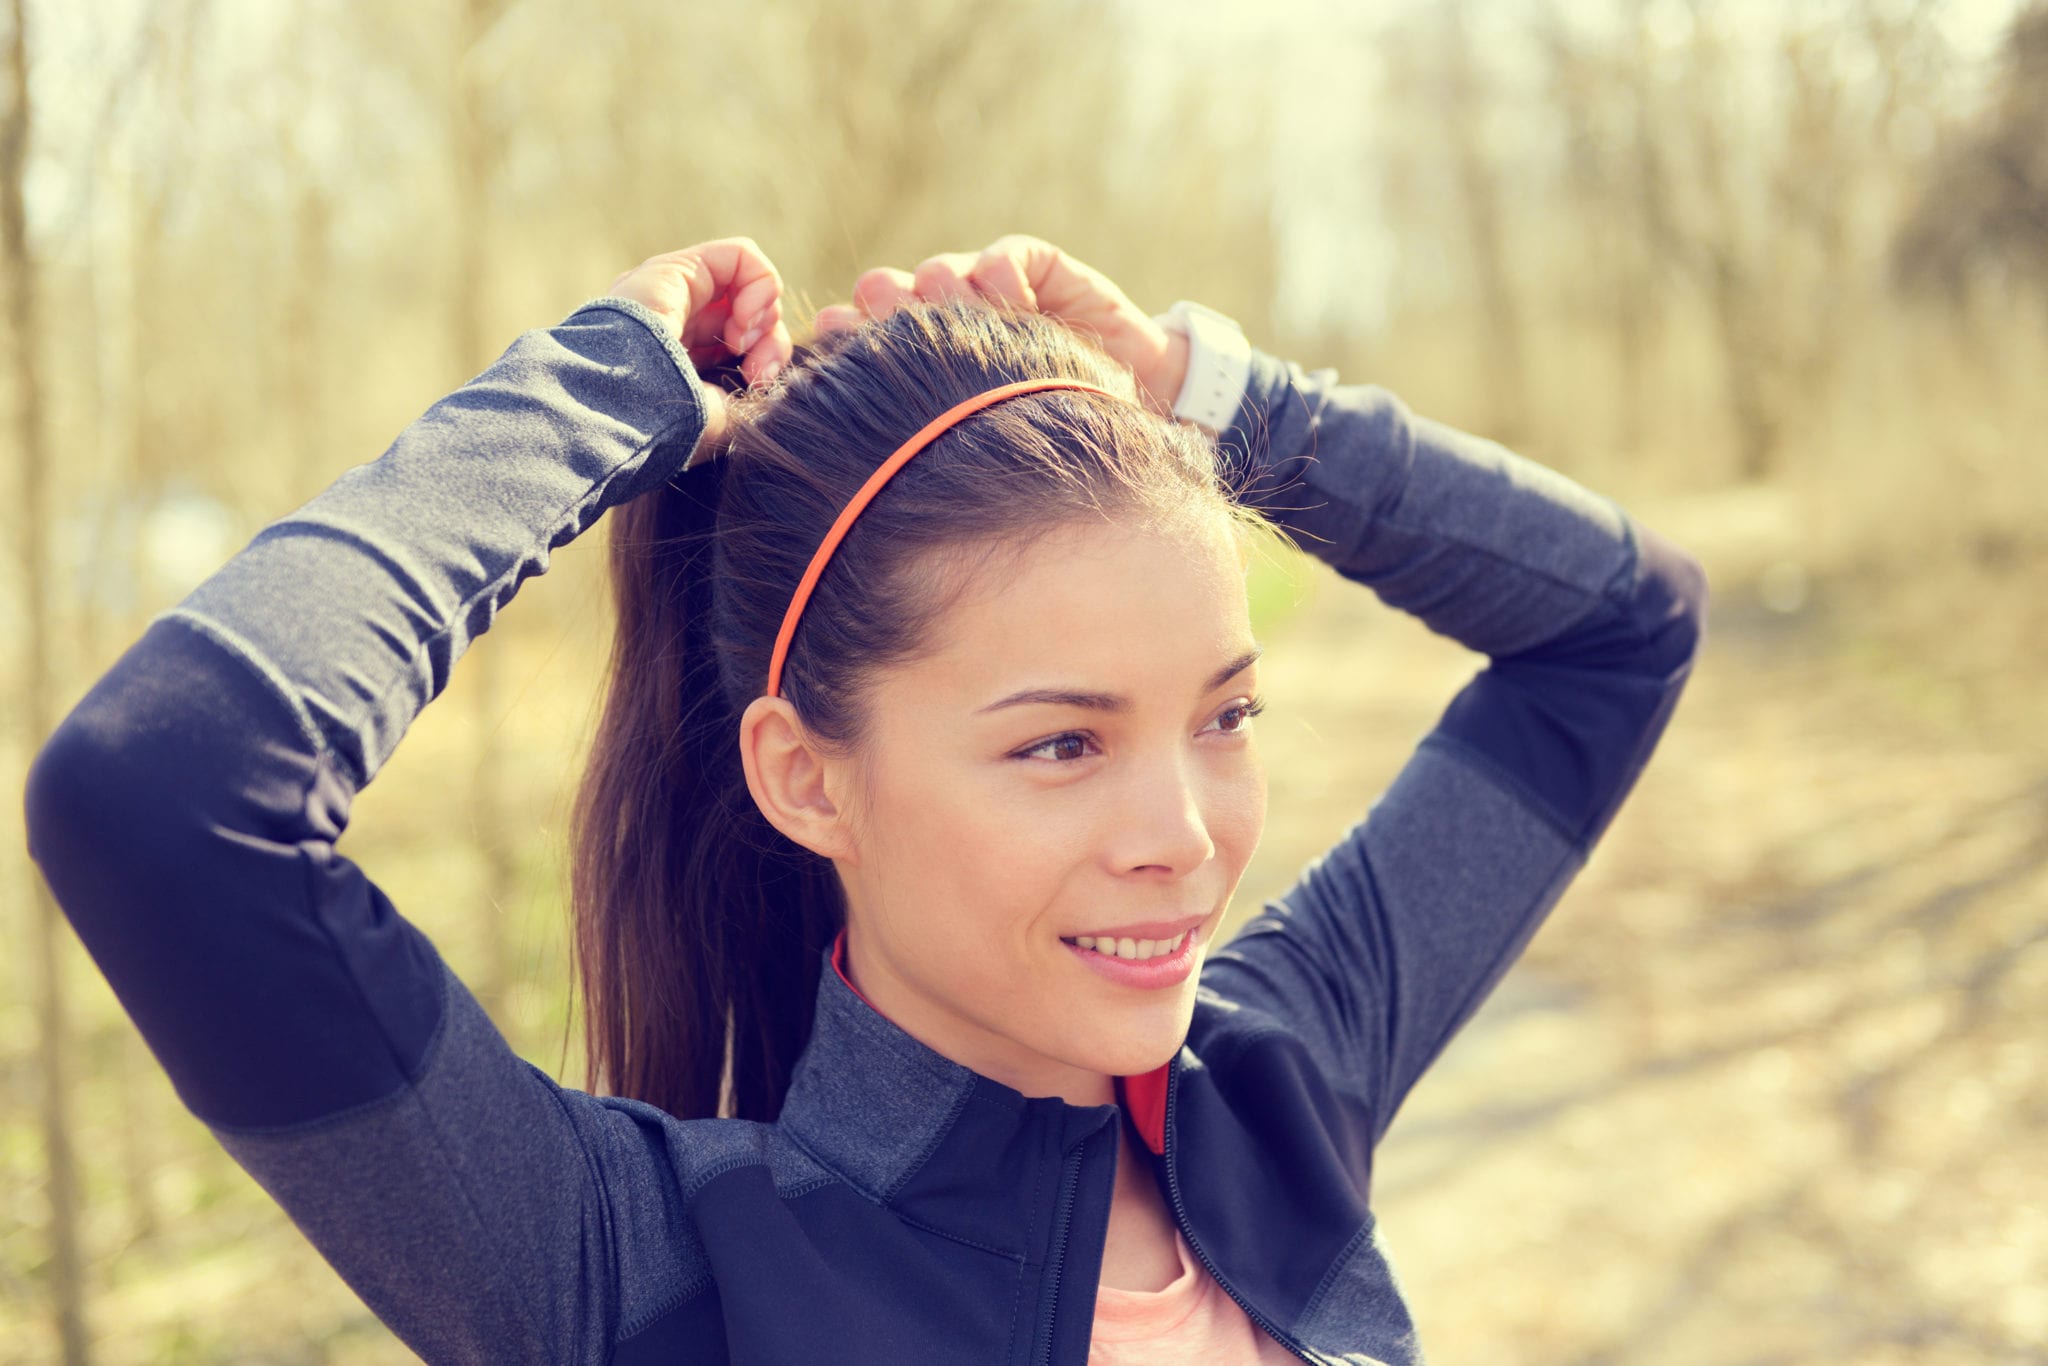 How to Keep Your Hair Looking Good During Workout | Healthy